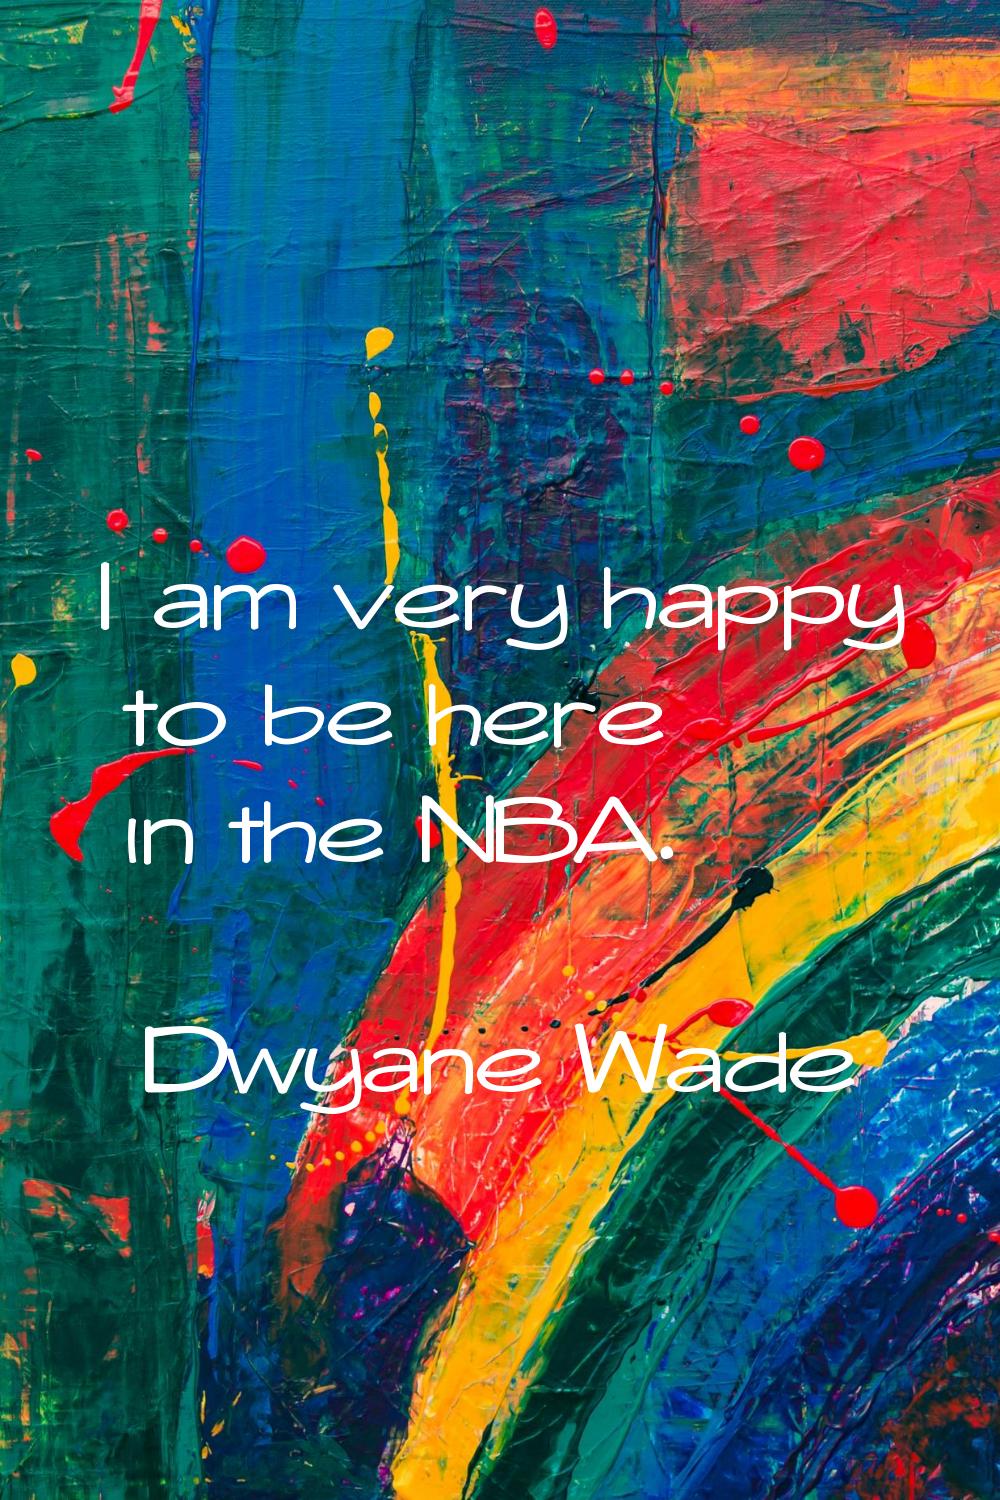 I am very happy to be here in the NBA.